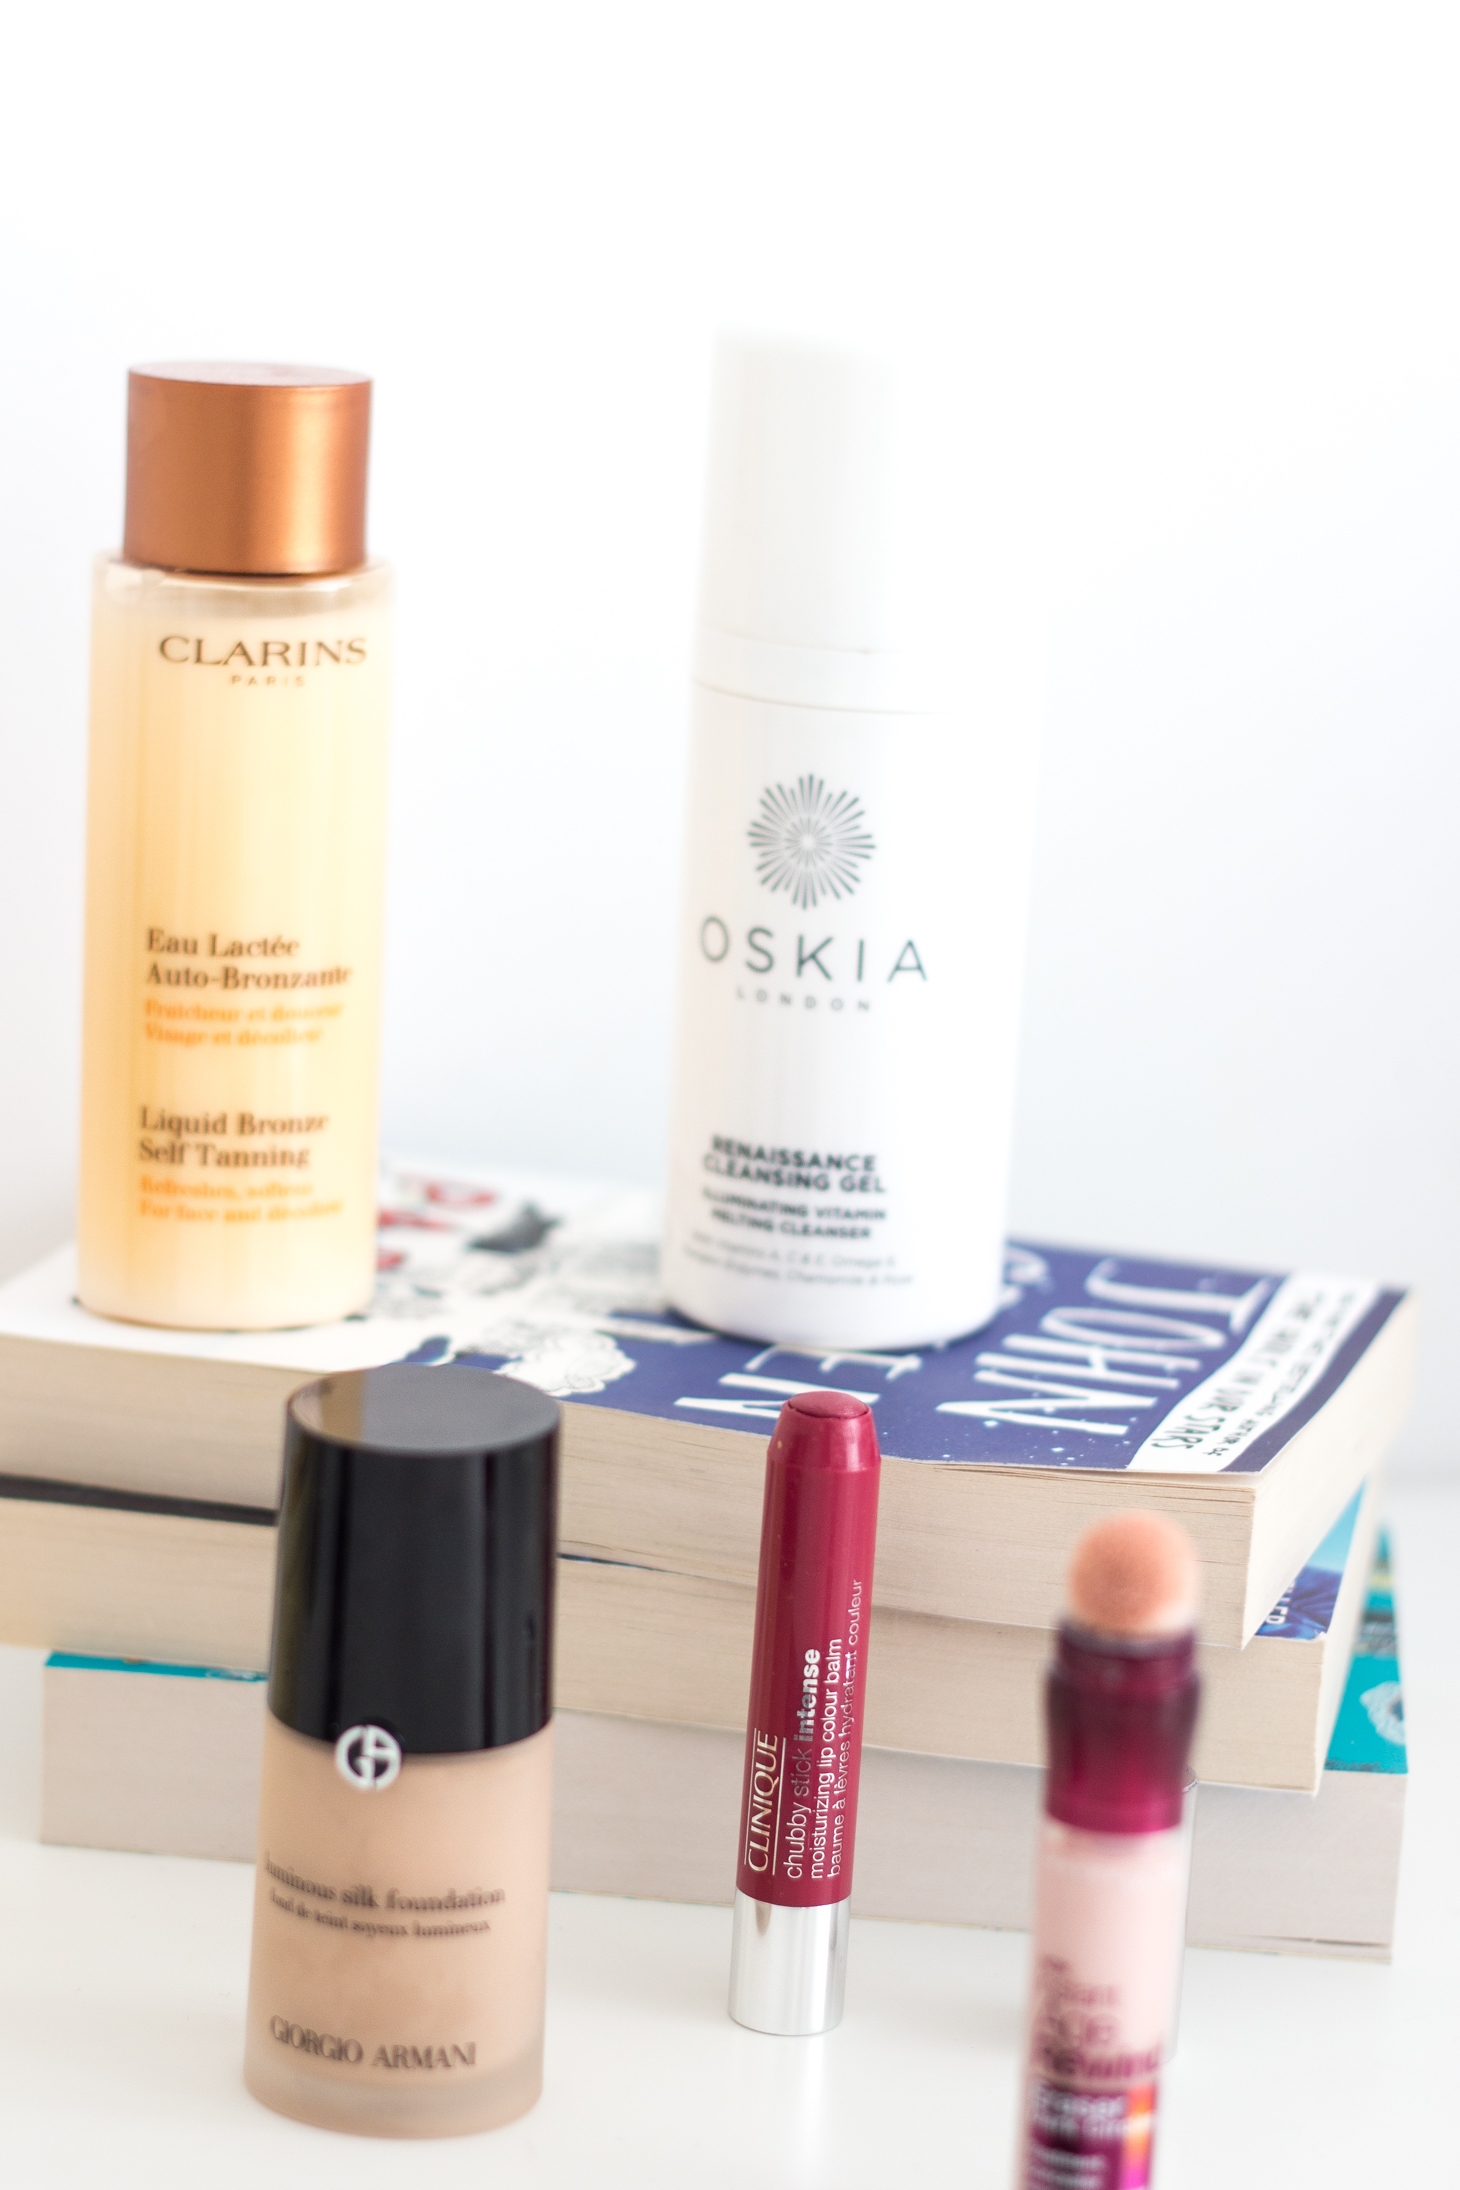 My most repurchased beauty products